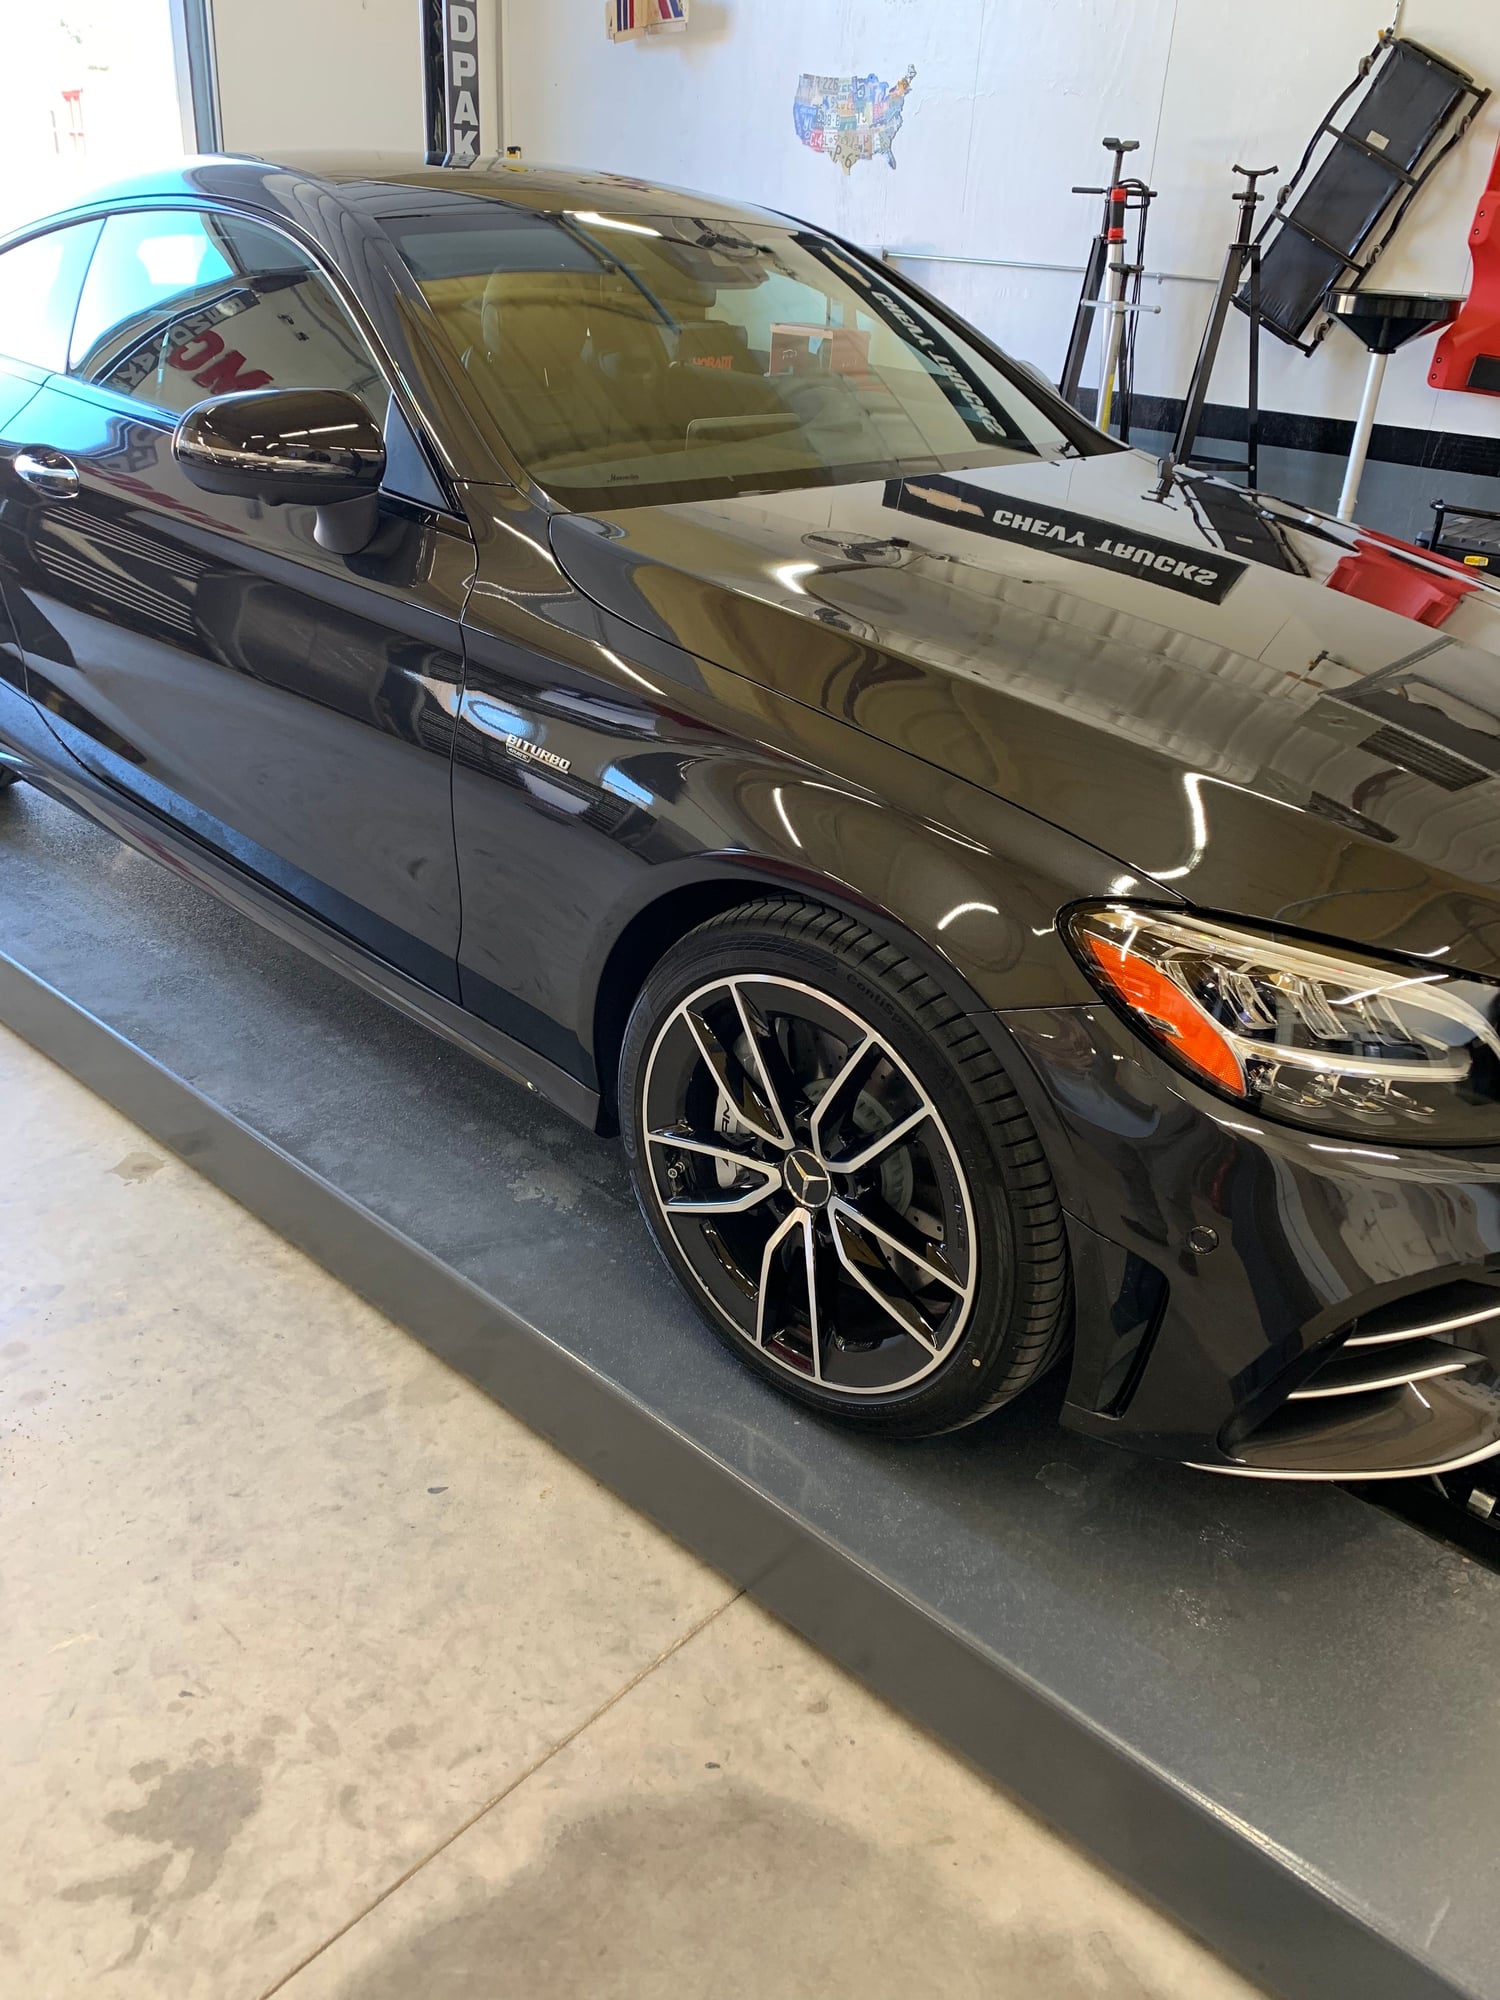 2019 Mercedes-Benz AMG GT C - 2019 Mercedes AMG C43 coupe Auto Digital Cluster - Used - VIN WDDWJ6EB9KF834083 - 2,000 Miles - 6 cyl - AWD - Automatic - Coupe - Gray - Harrah, OK 73045, United States